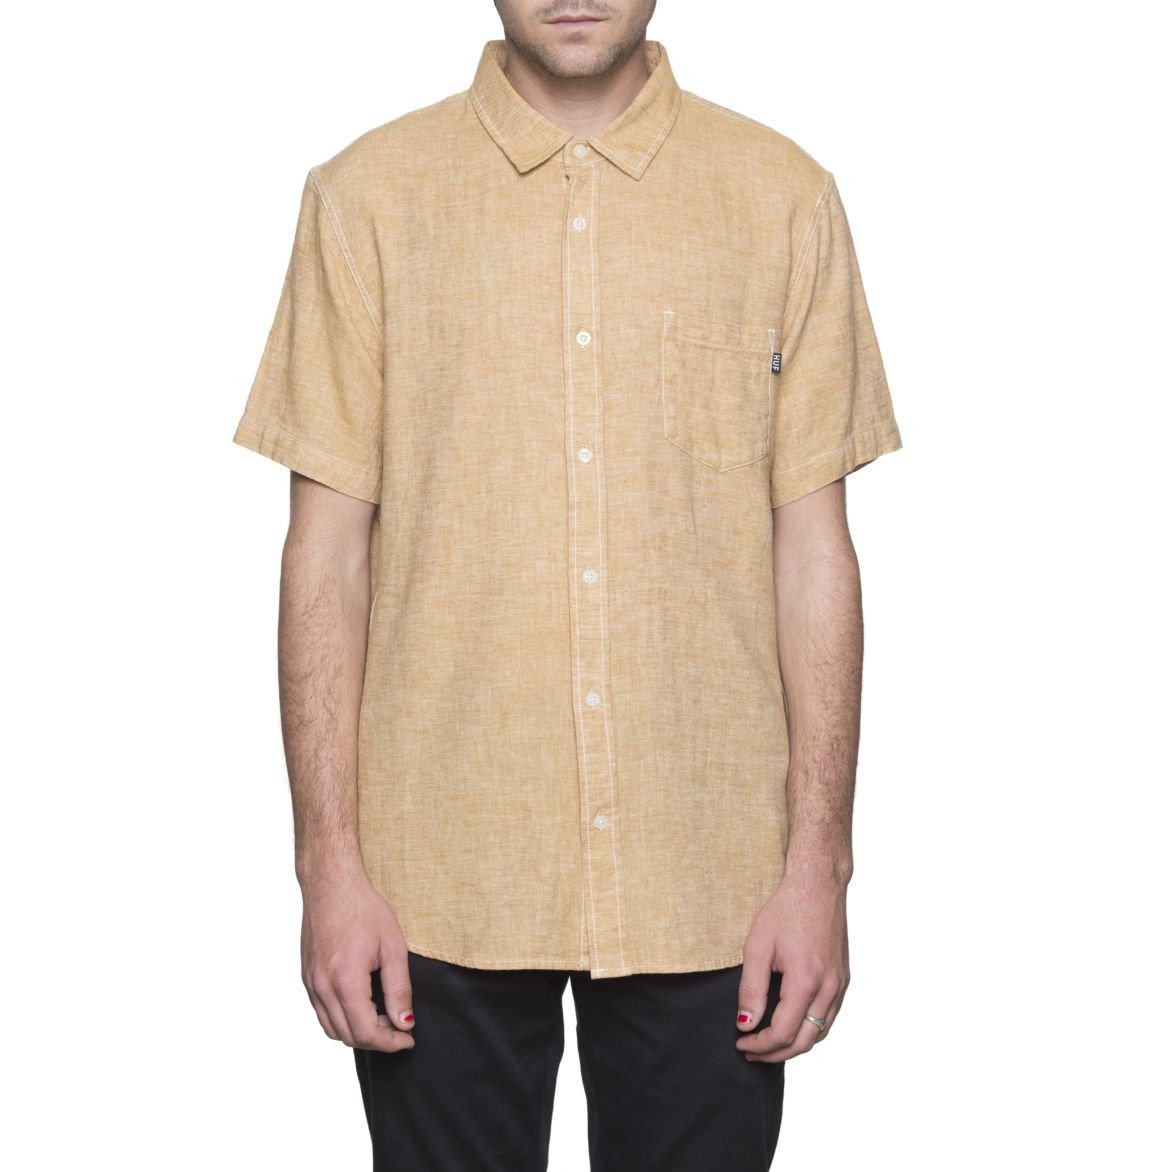 HUF COURSE S/S CHAMBRAY SHIRT // NATURAL-The Collateral